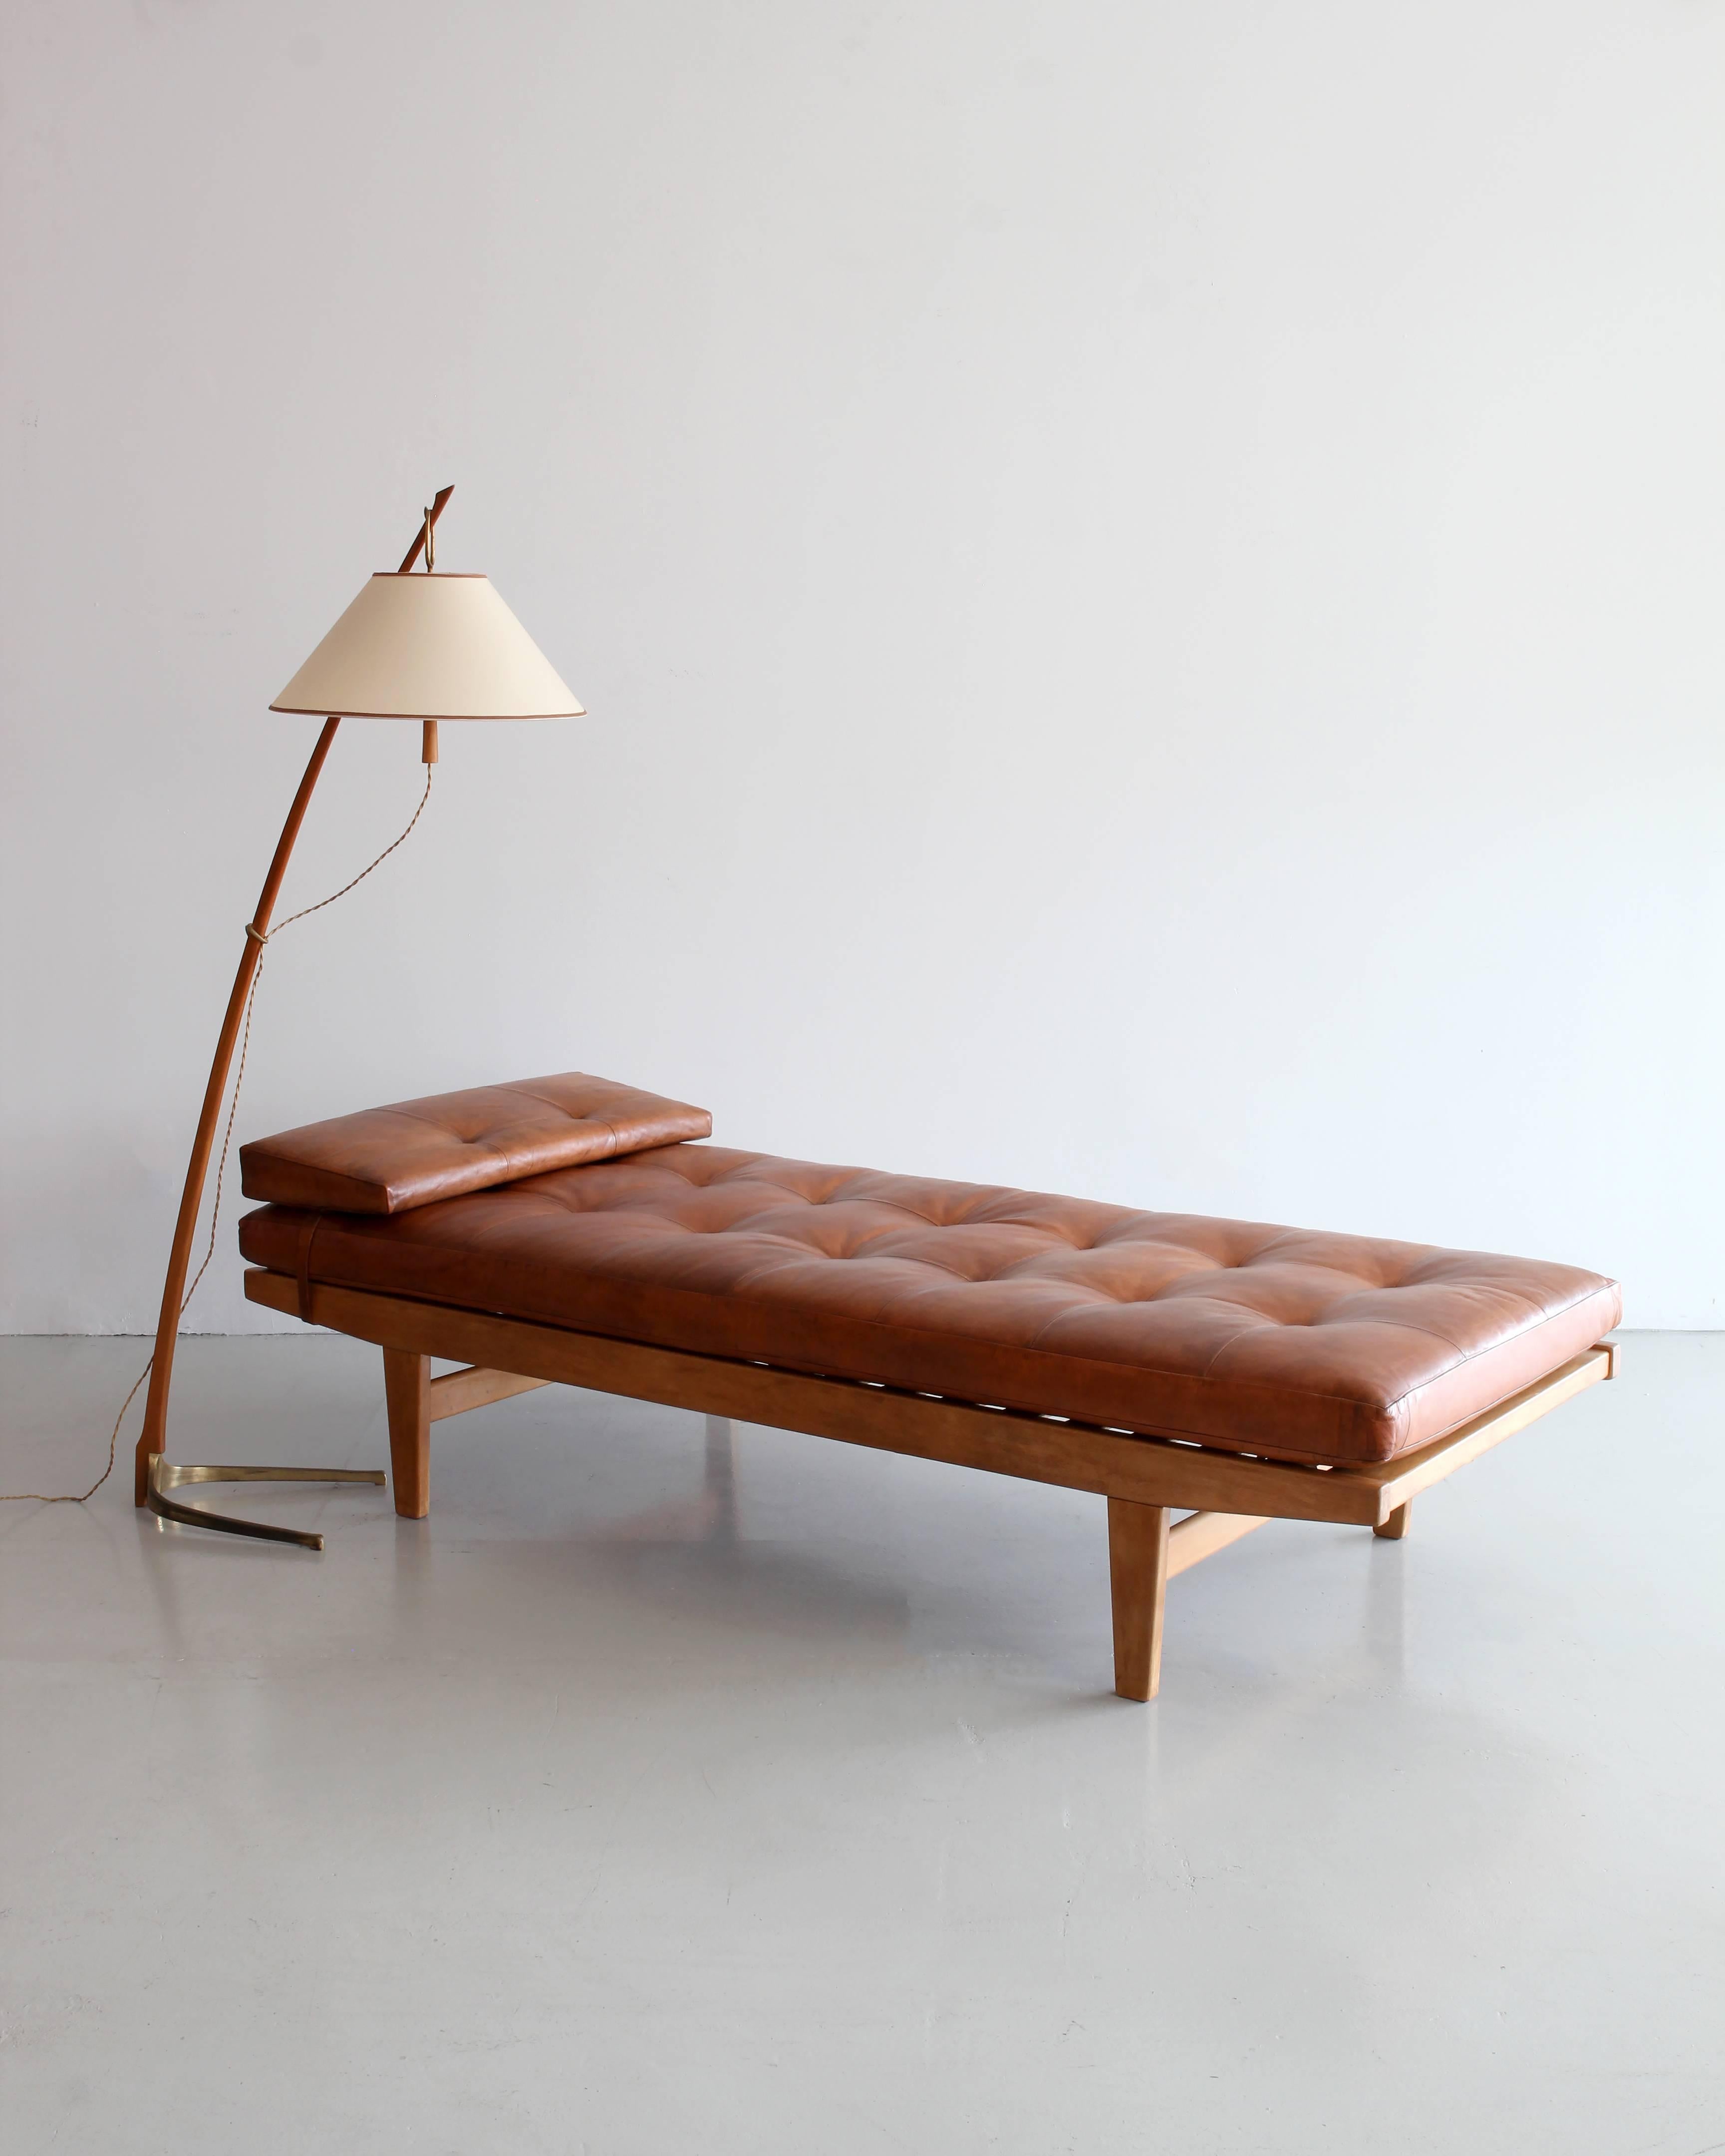 Wonderful daybed by Poul Volther in beautifully aged cognac tufted leather cushion and wedged pillow. 
Simple slatted oakwood frame.